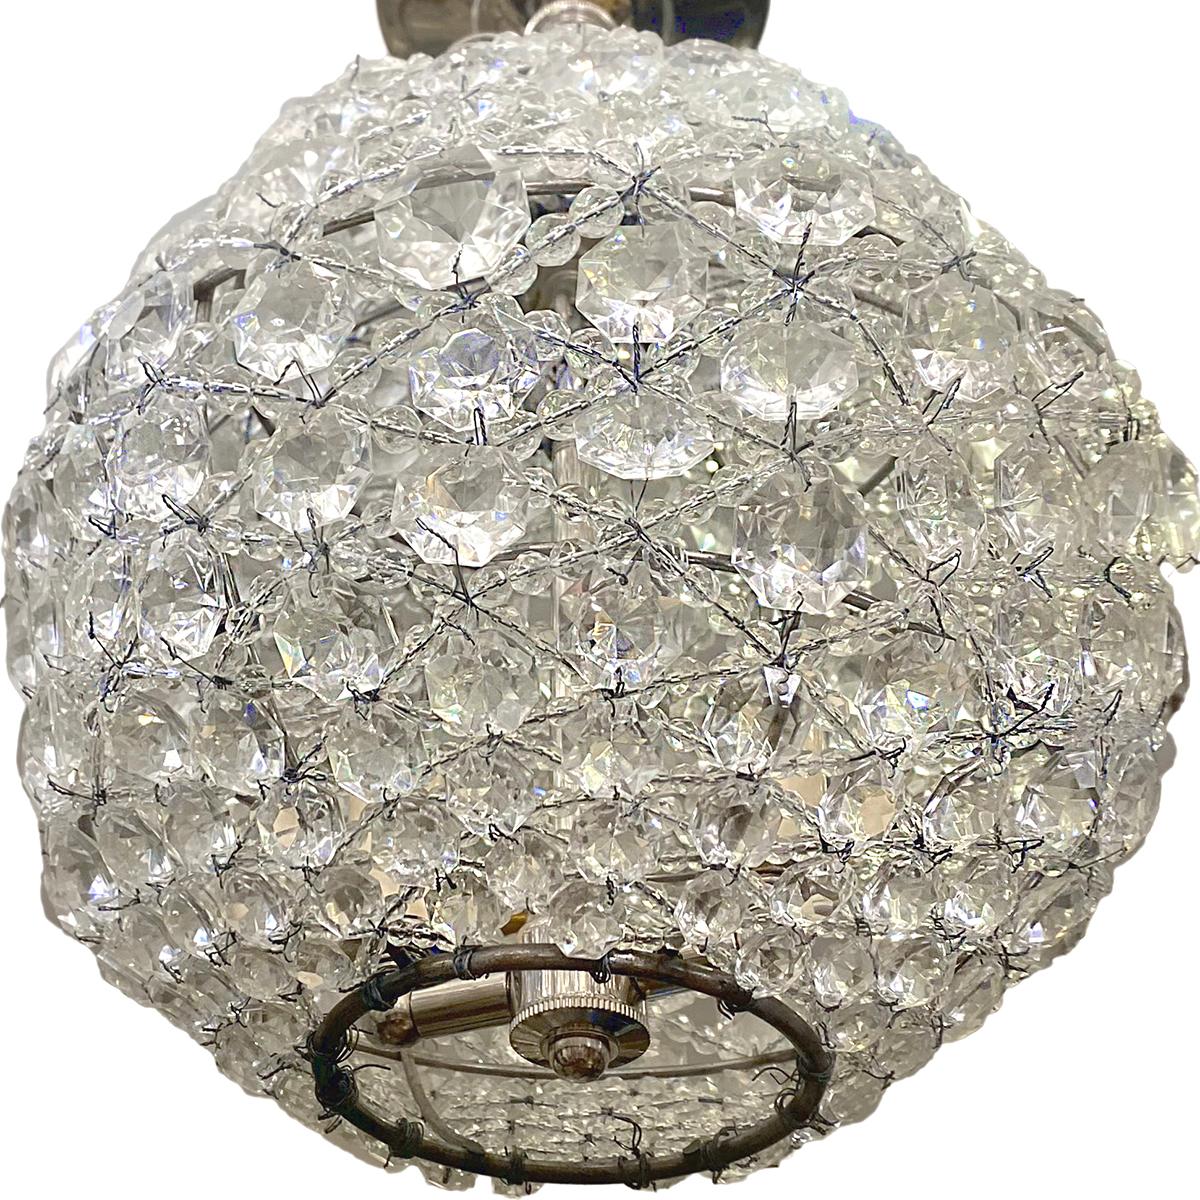 A circa 1940's French beaded crystals lantern with 2 interior lights.

Measurements:
Height: 16